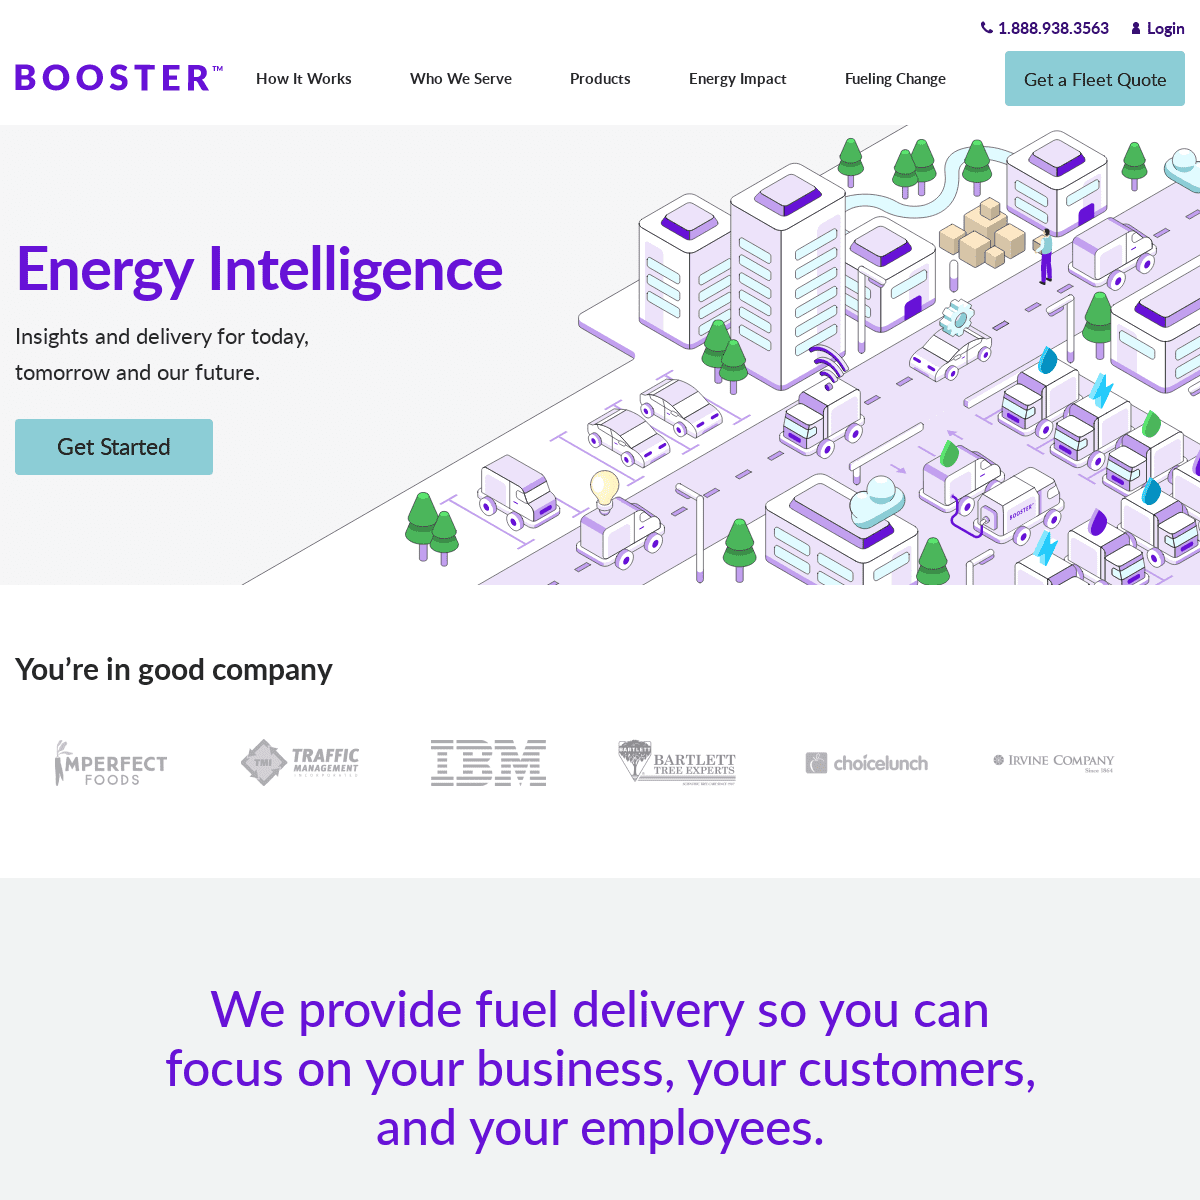 A complete backup of https://boosterusa.com